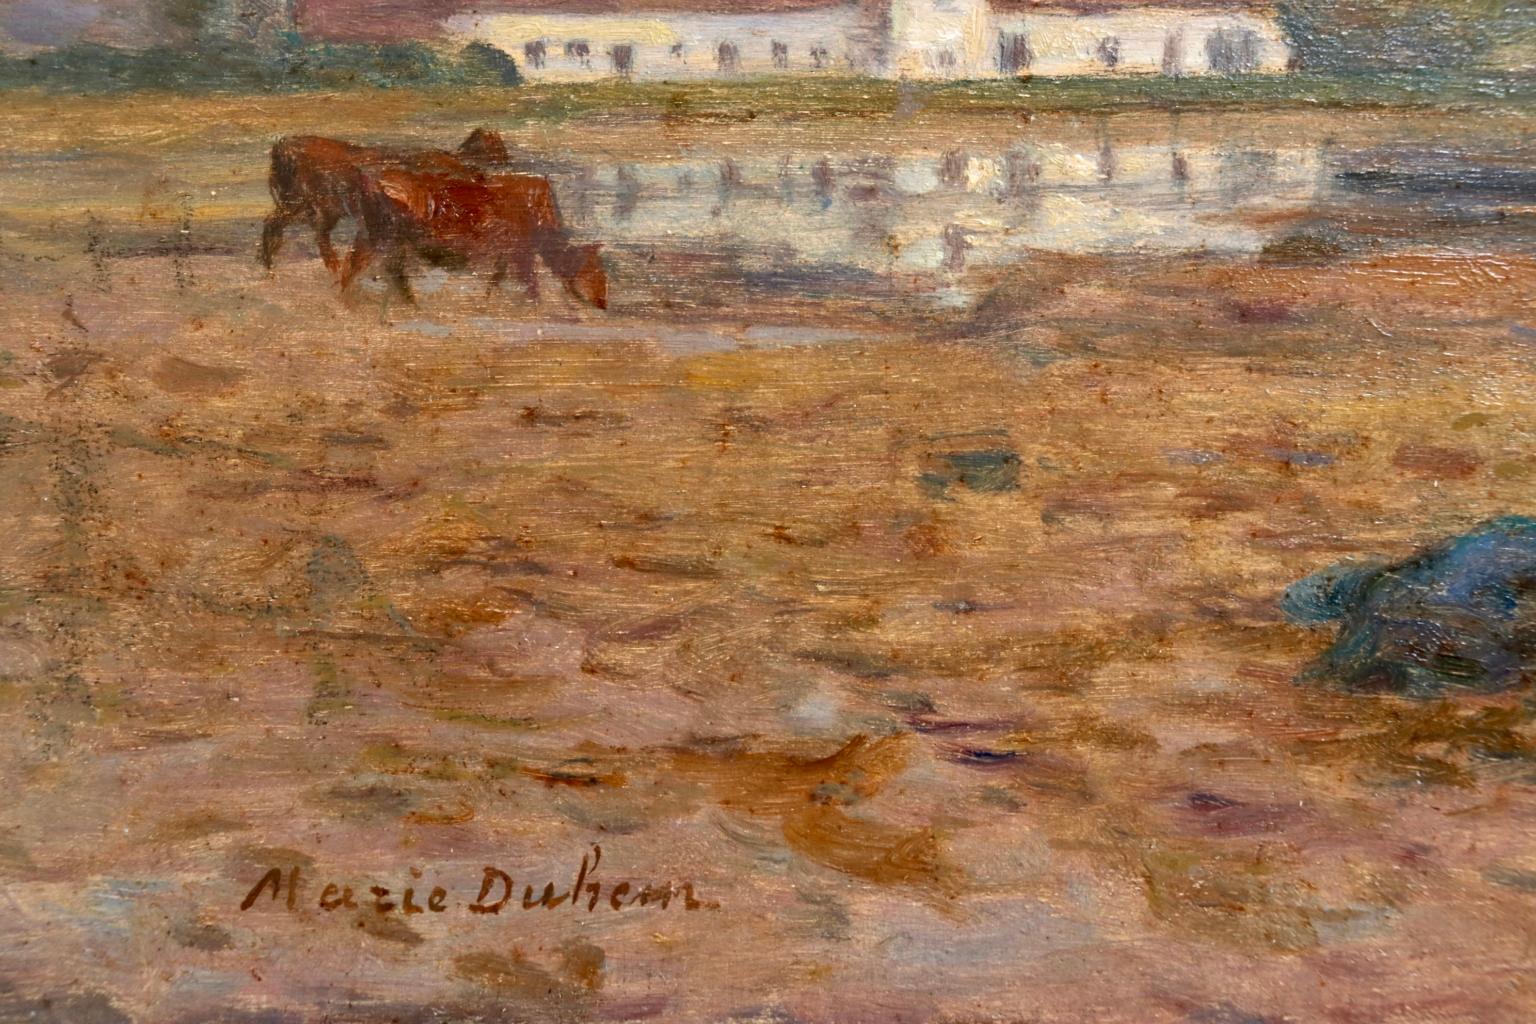 A wonderful oil on panel circa 1905 by French impressionist painter Marie Duhem depicting a woman seated on the grass with cattle grazing nearby and a pond and farmhouse beyond. 

Signature:
Signed lower left

Dimensions:
Unframed: 7.5